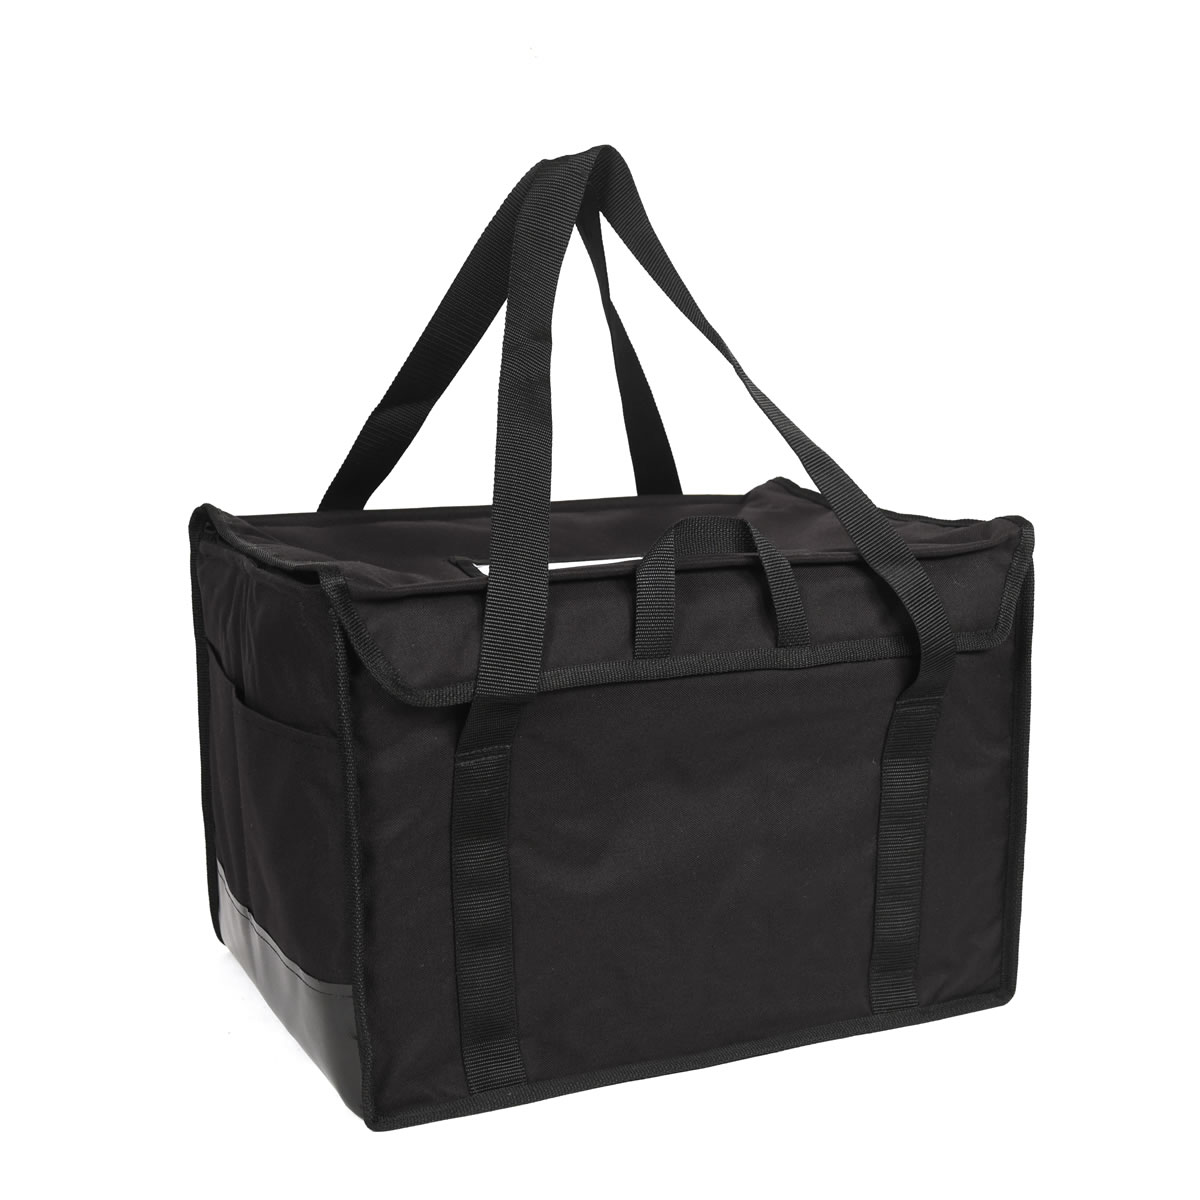 Heated Food Delivery Bag in Black From RediHeat